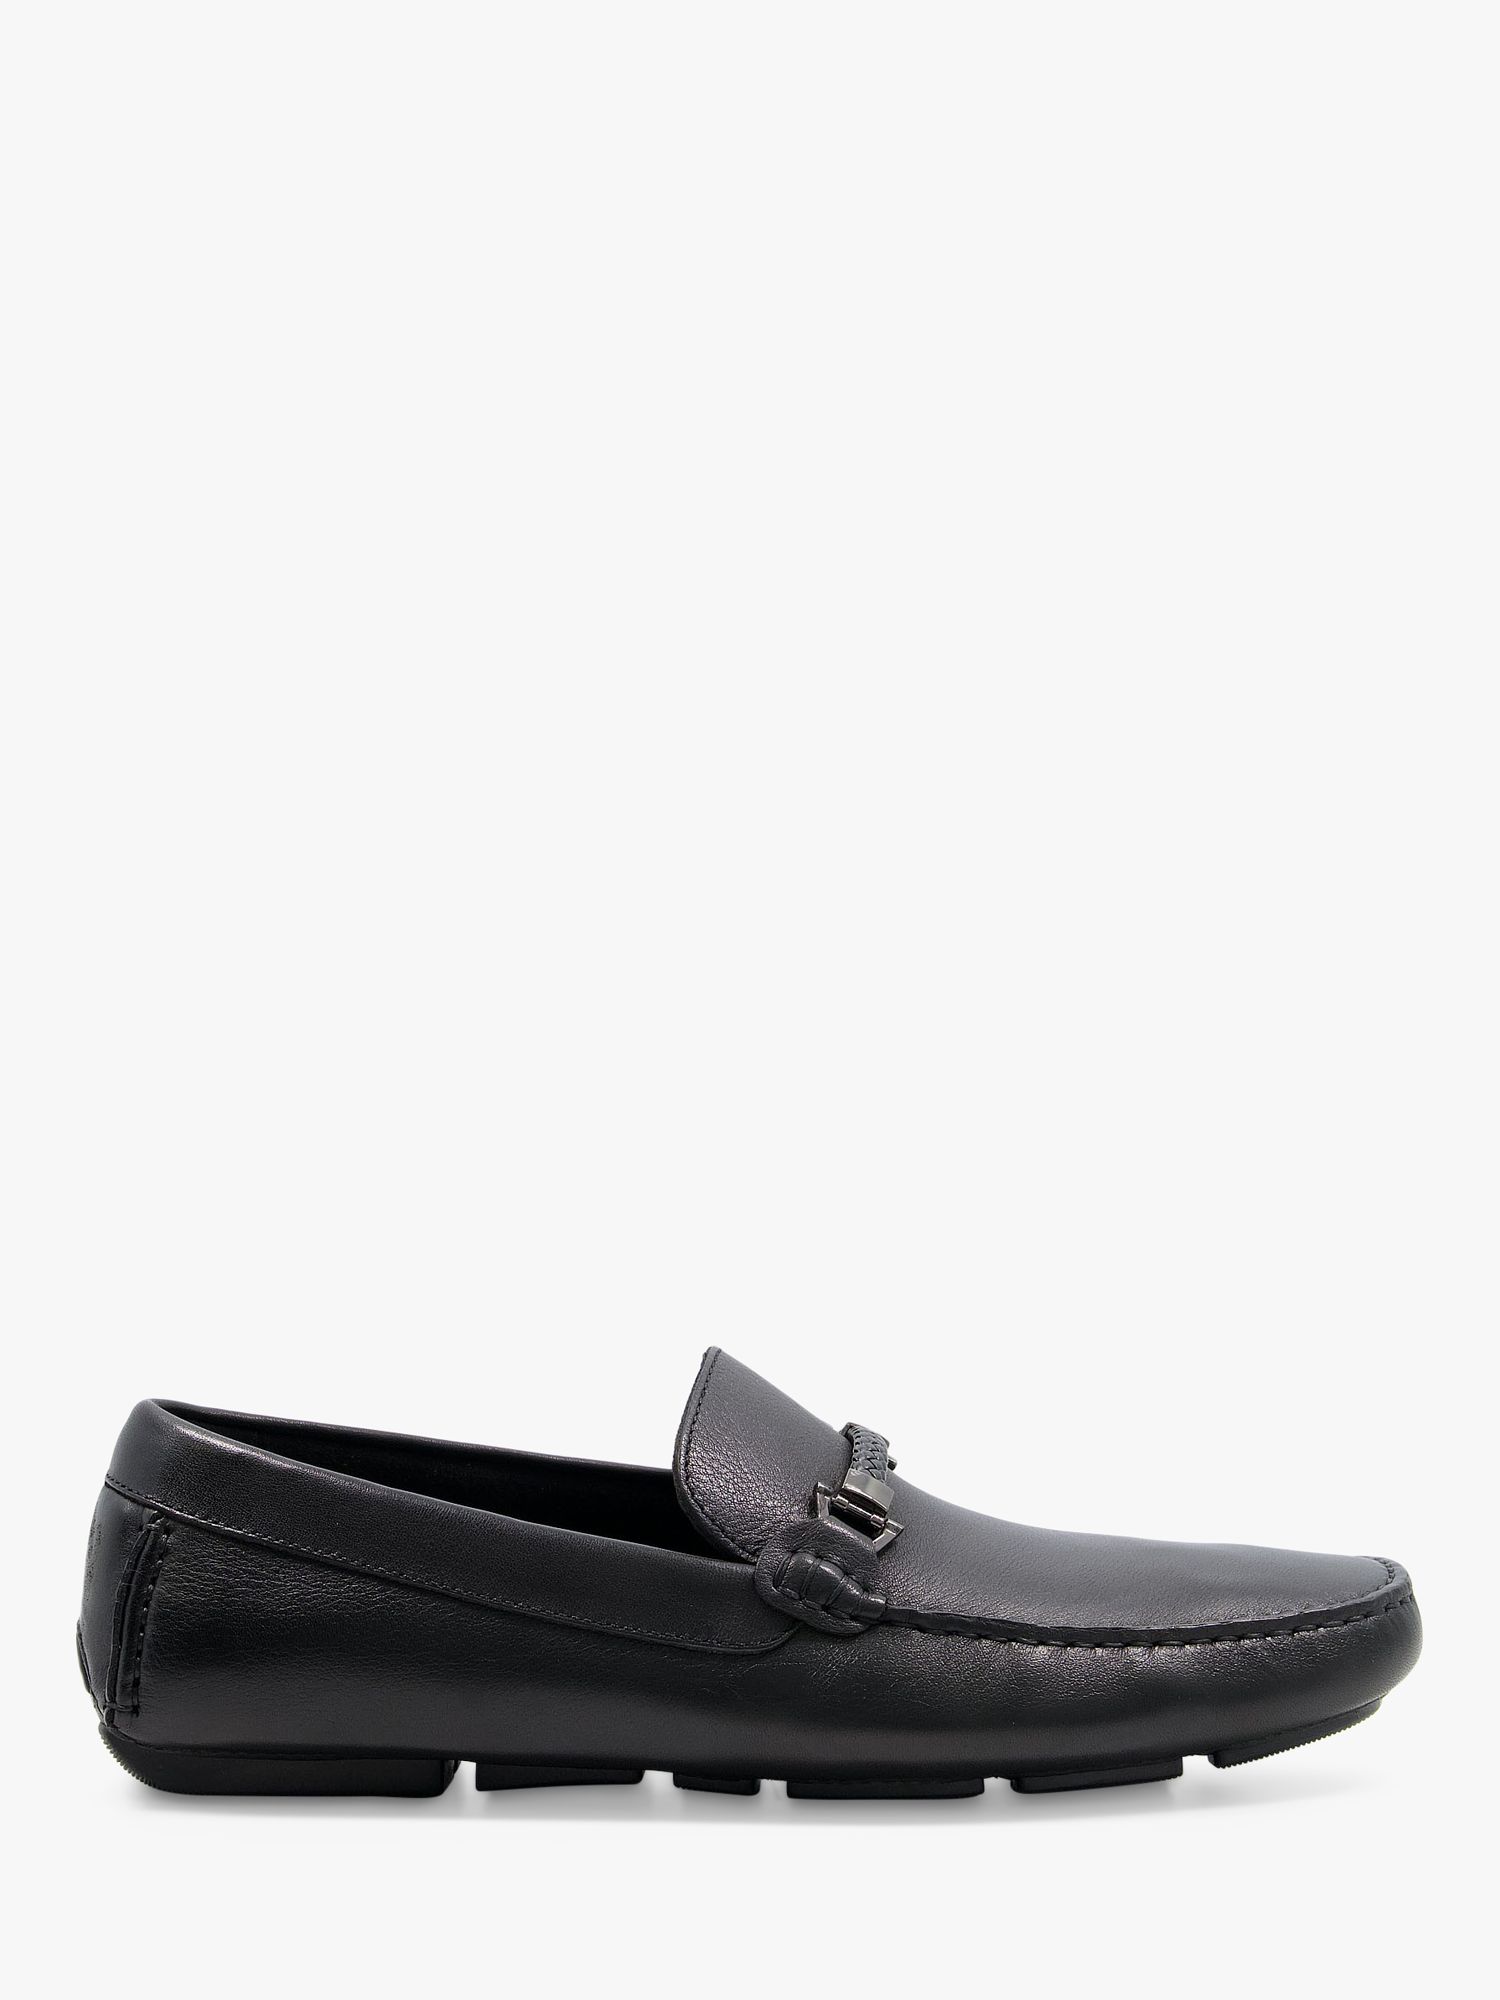 Dune Woven Trim Driver Beacons Loafers, Black, 11